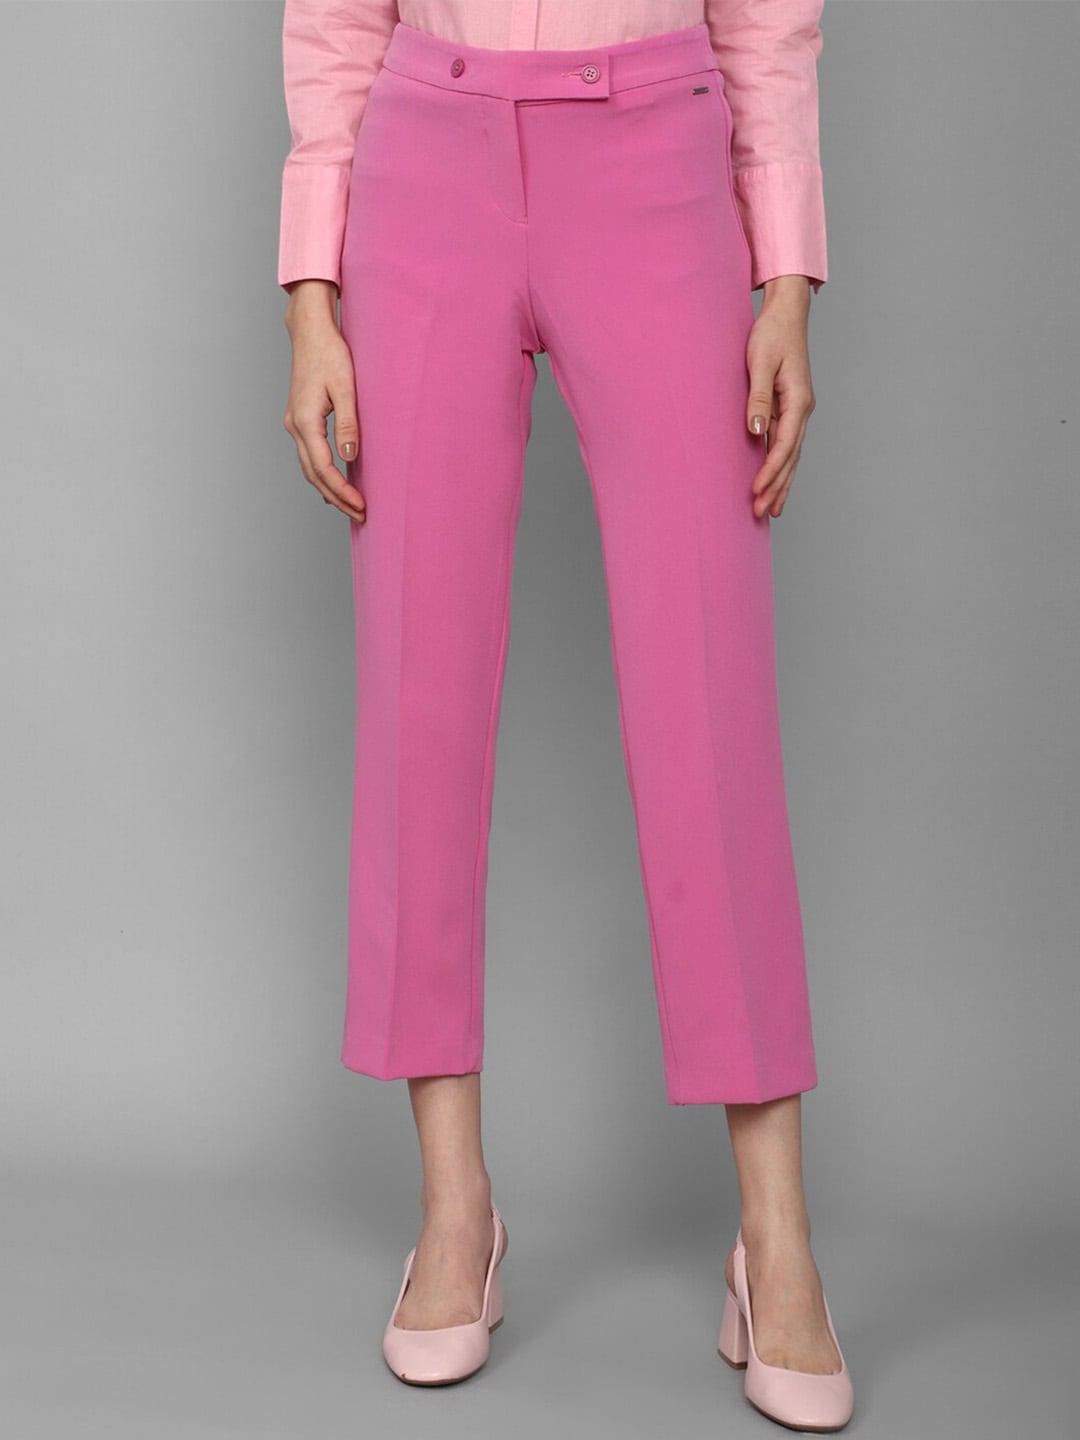 allen-solly-woman-mid-rise-trousers